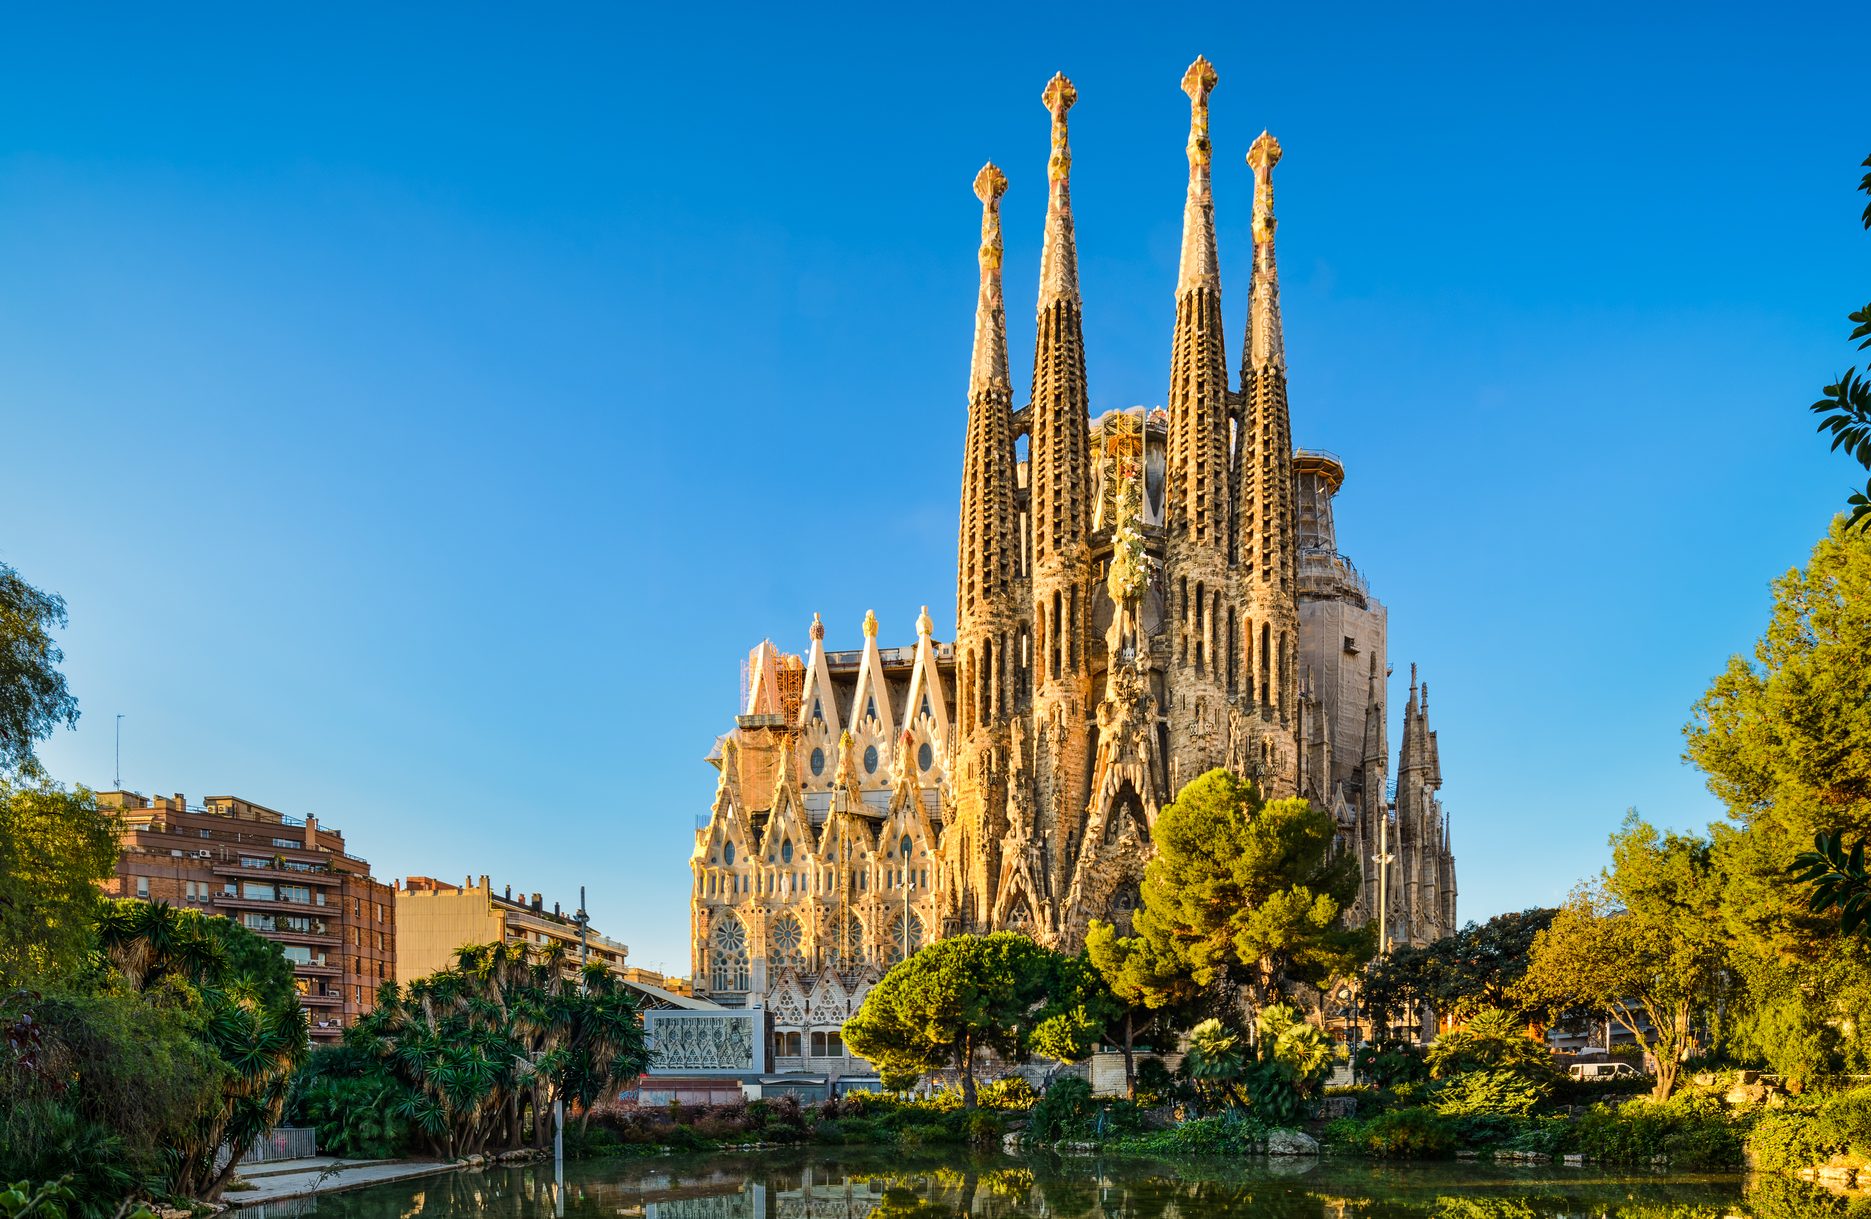 Architecting Your Vision: An image of the Sagrada Familia in Barcelona